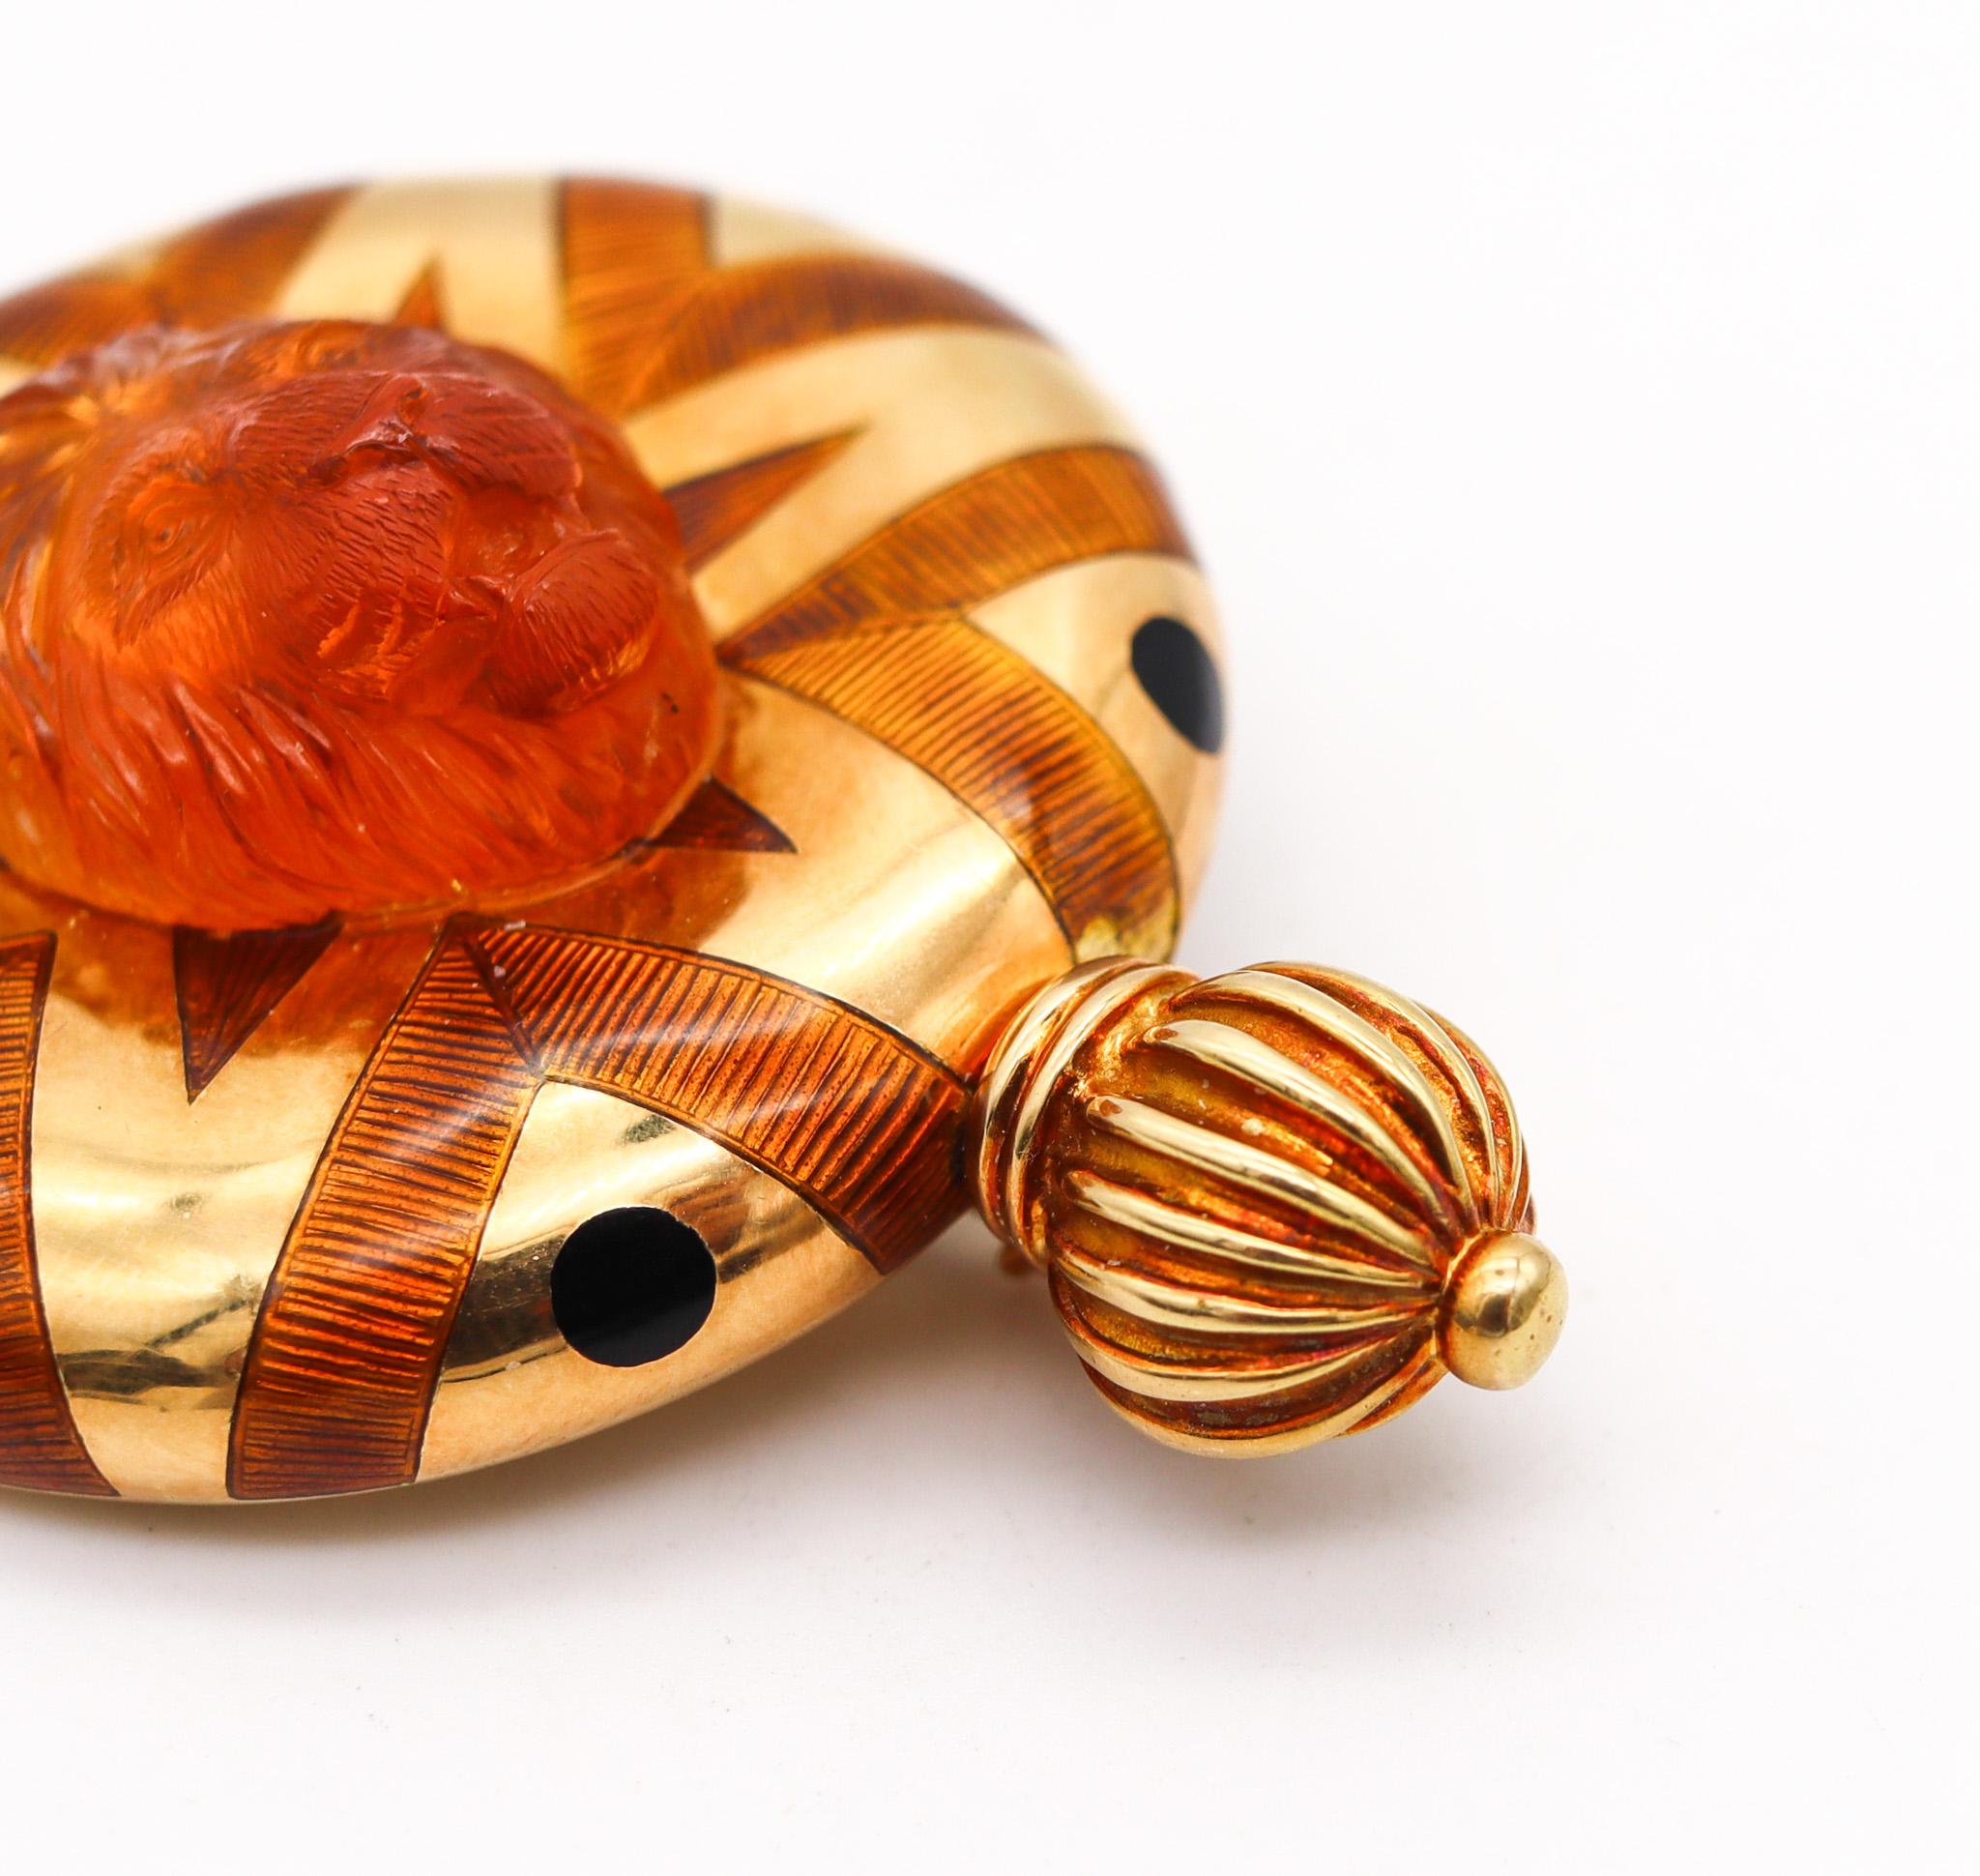 Elizabeth Gage 1993 London Enameled Pendant Brooch In 18Kt Gold With Citrine In Excellent Condition For Sale In Miami, FL